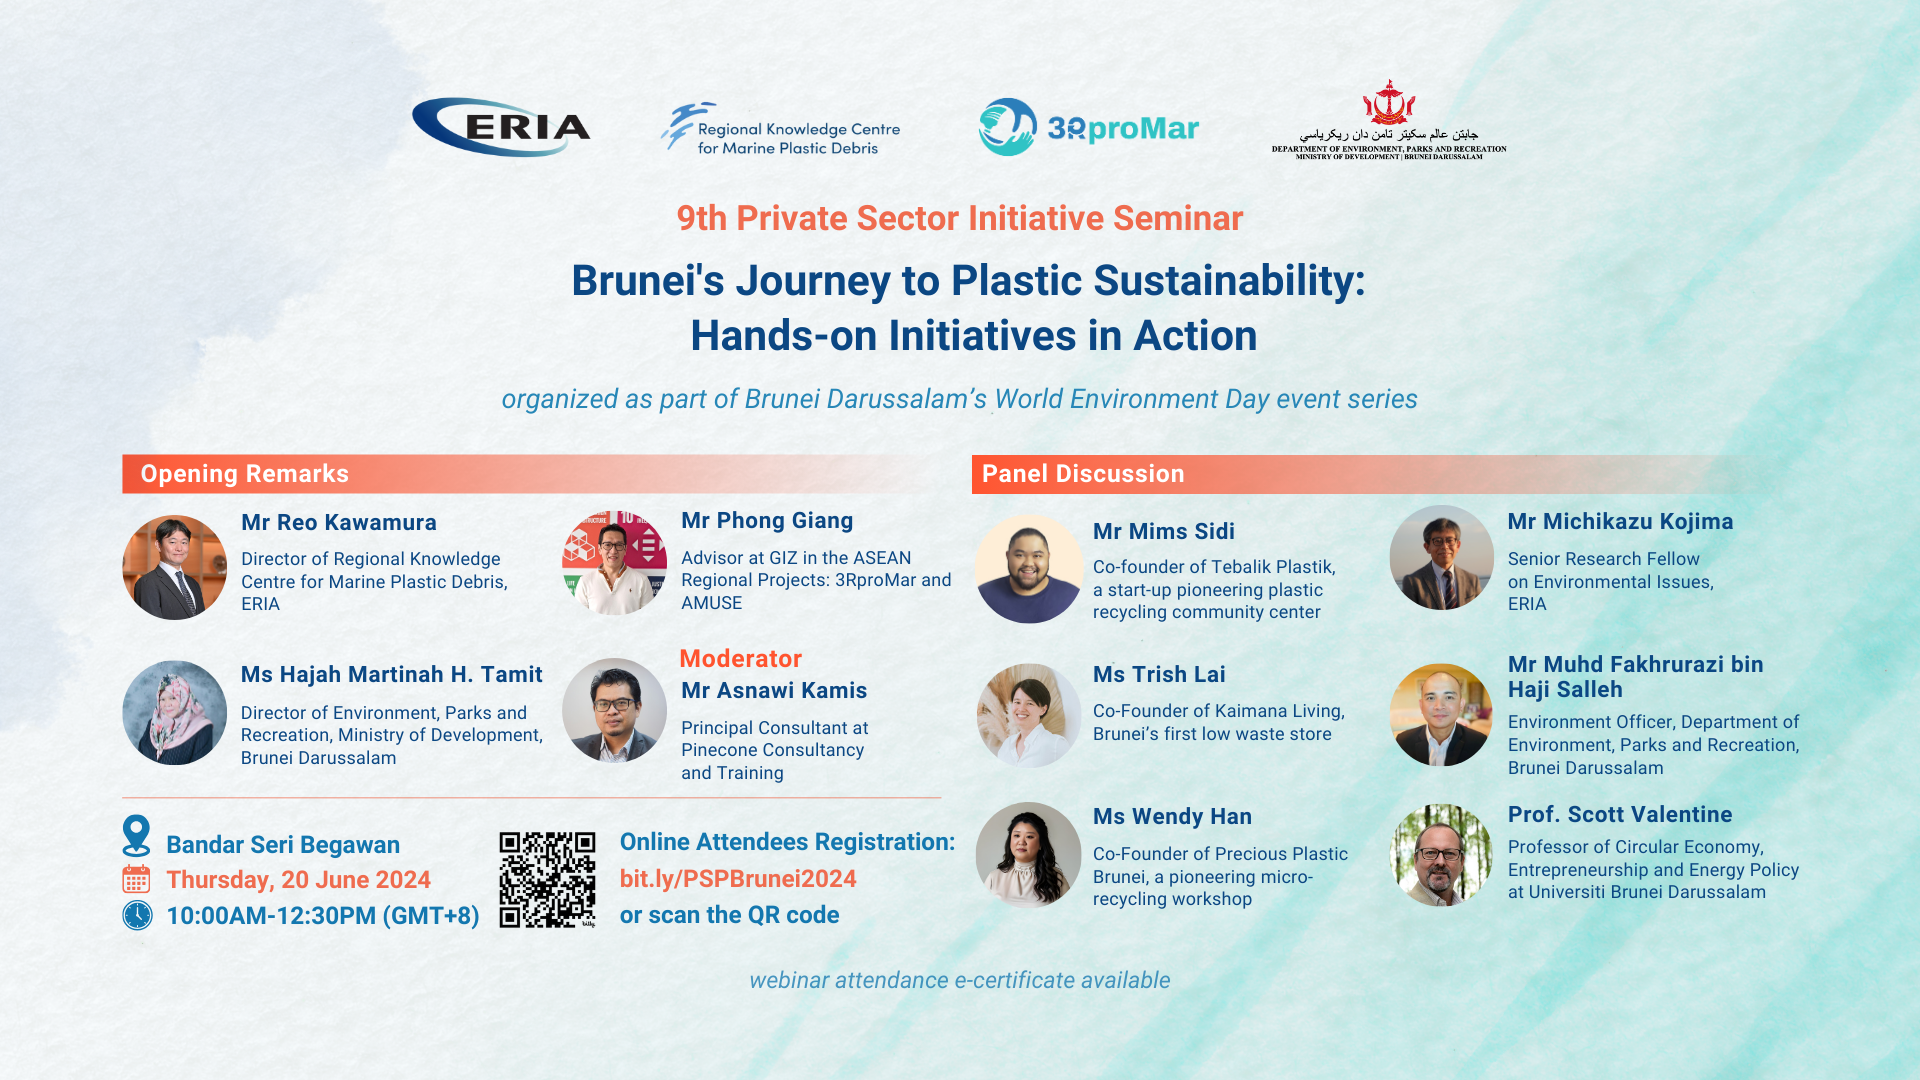 Brunei's Journey to Plastic Sustainability: Hands-on Initiatives in Action